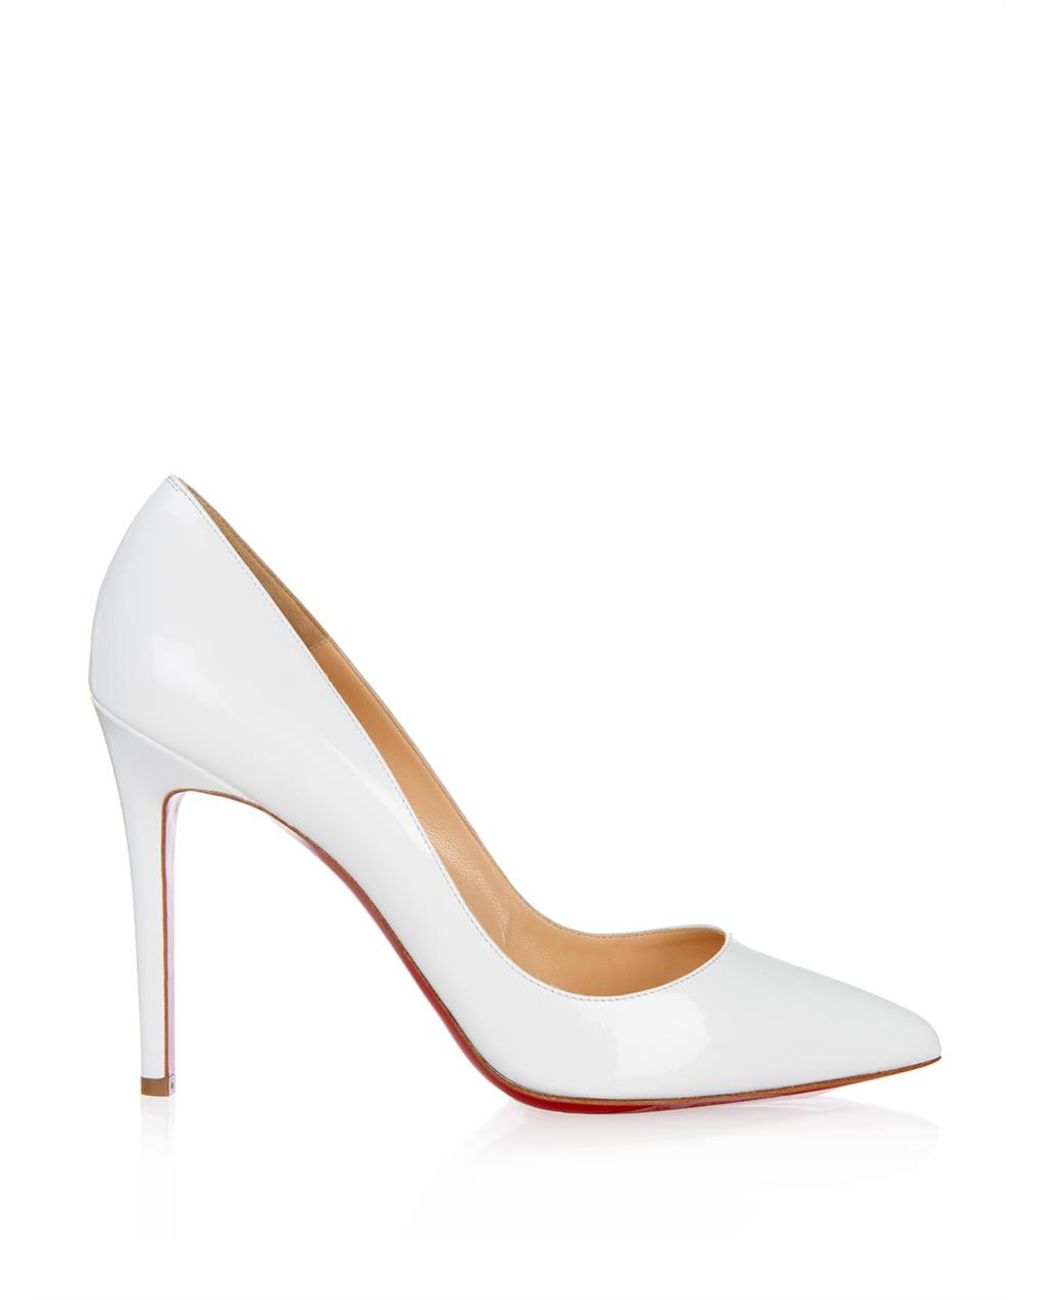 Christian Louboutin Pigalle 100Mm Patent-Leather Pumps in White | Lyst